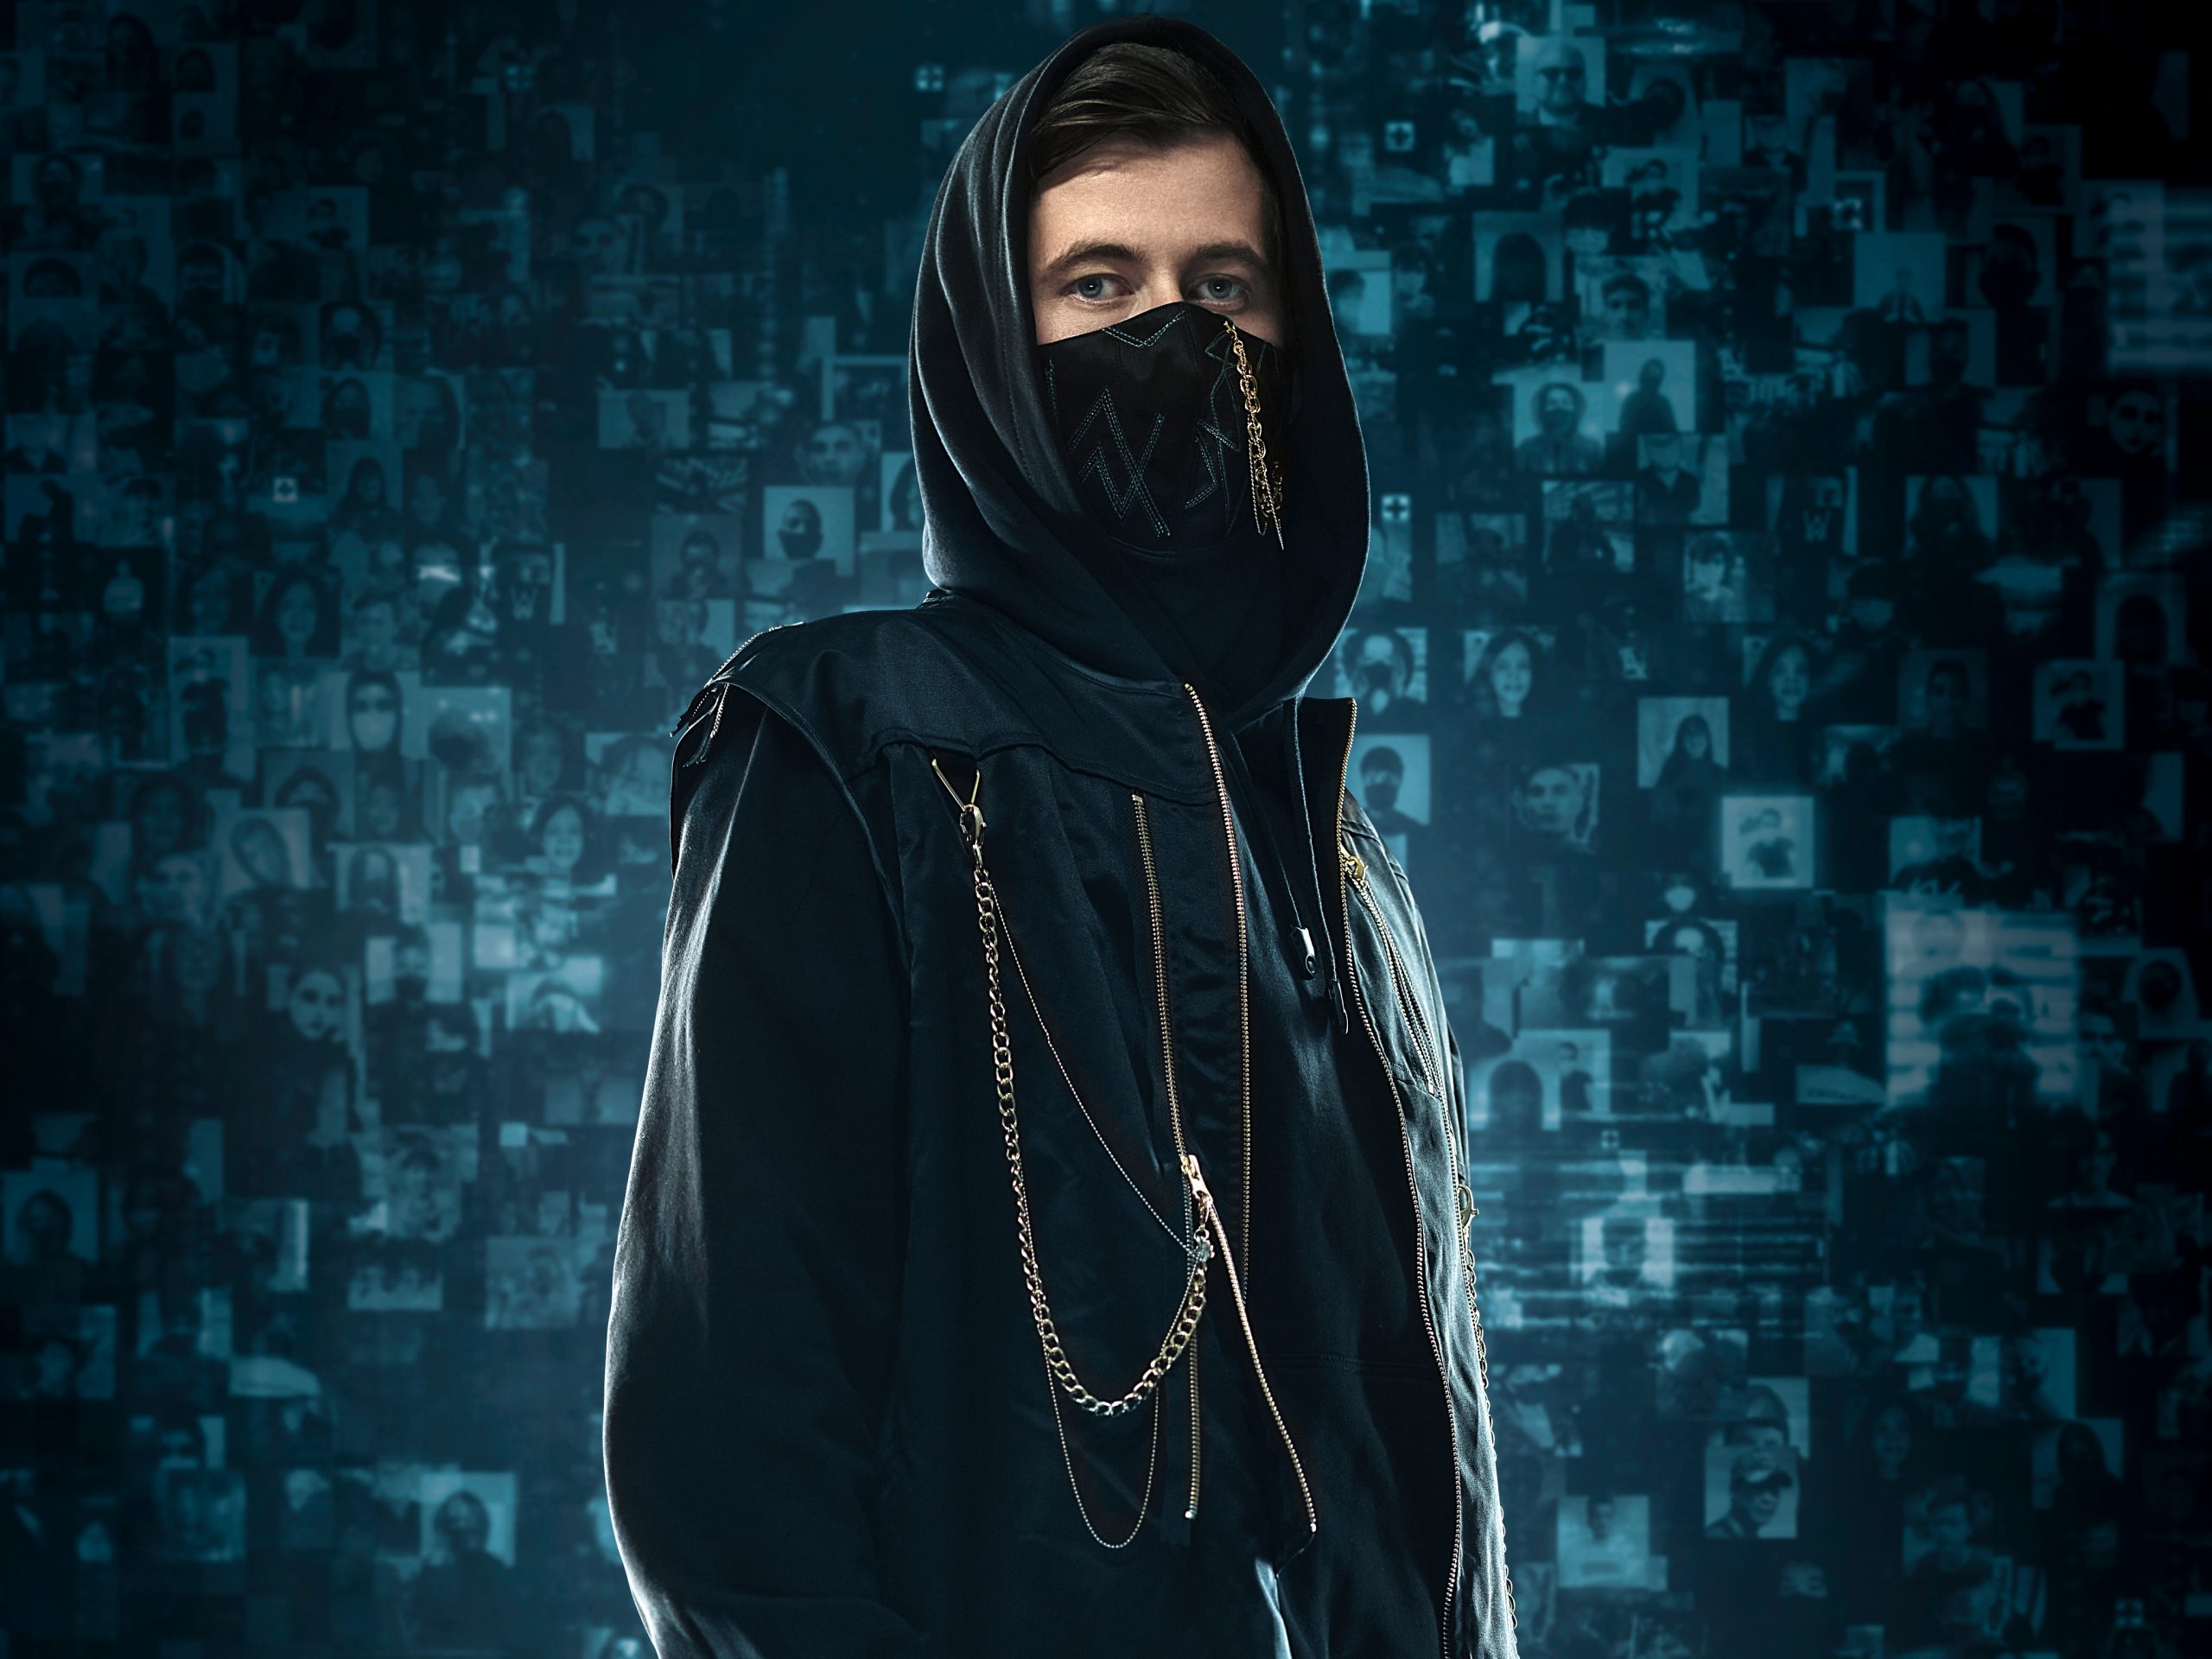 Psychologisch af hebben distillatie Alan Walker takes it back to the beginning with his new single "Dreamer"  which pays homage to his breakthrough hits "Faded" and "Alone" - CelebMix